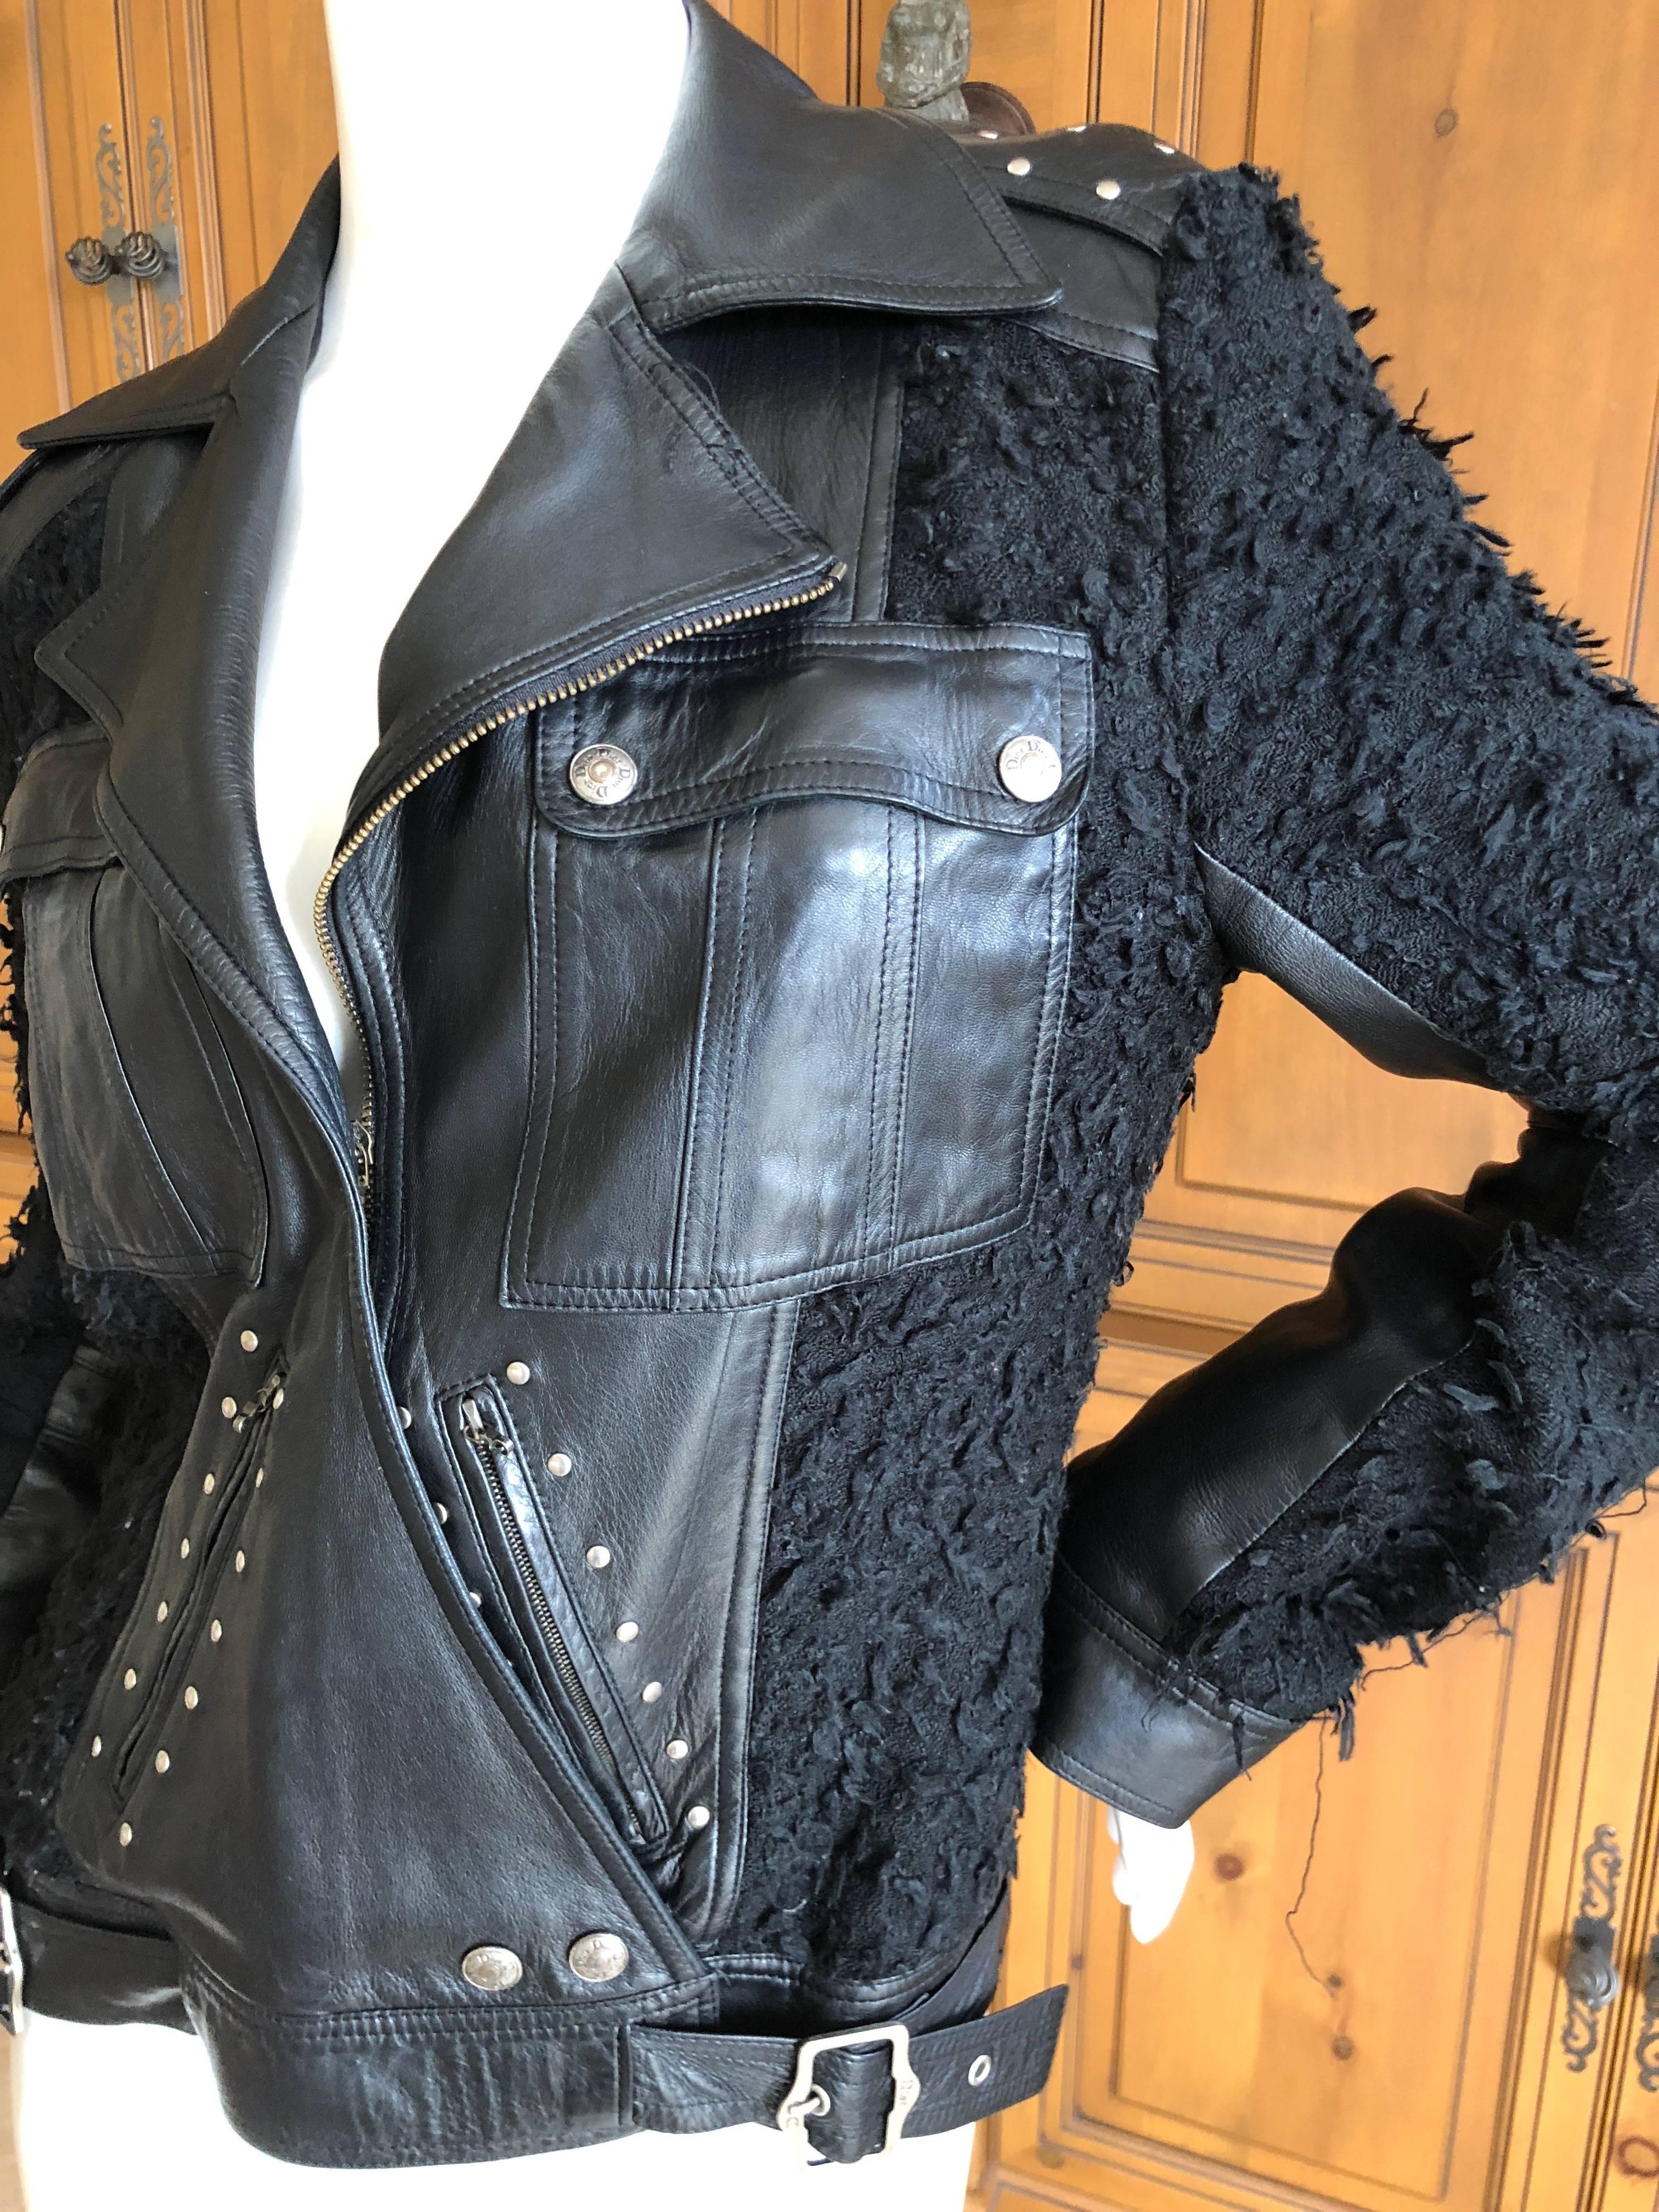 Christian Dior Black Lambskin Leather Accented Moto Jacket by Galliano.
With a nubby, textural body and a leather front , this is the bomb!
Size 40
Bust 38